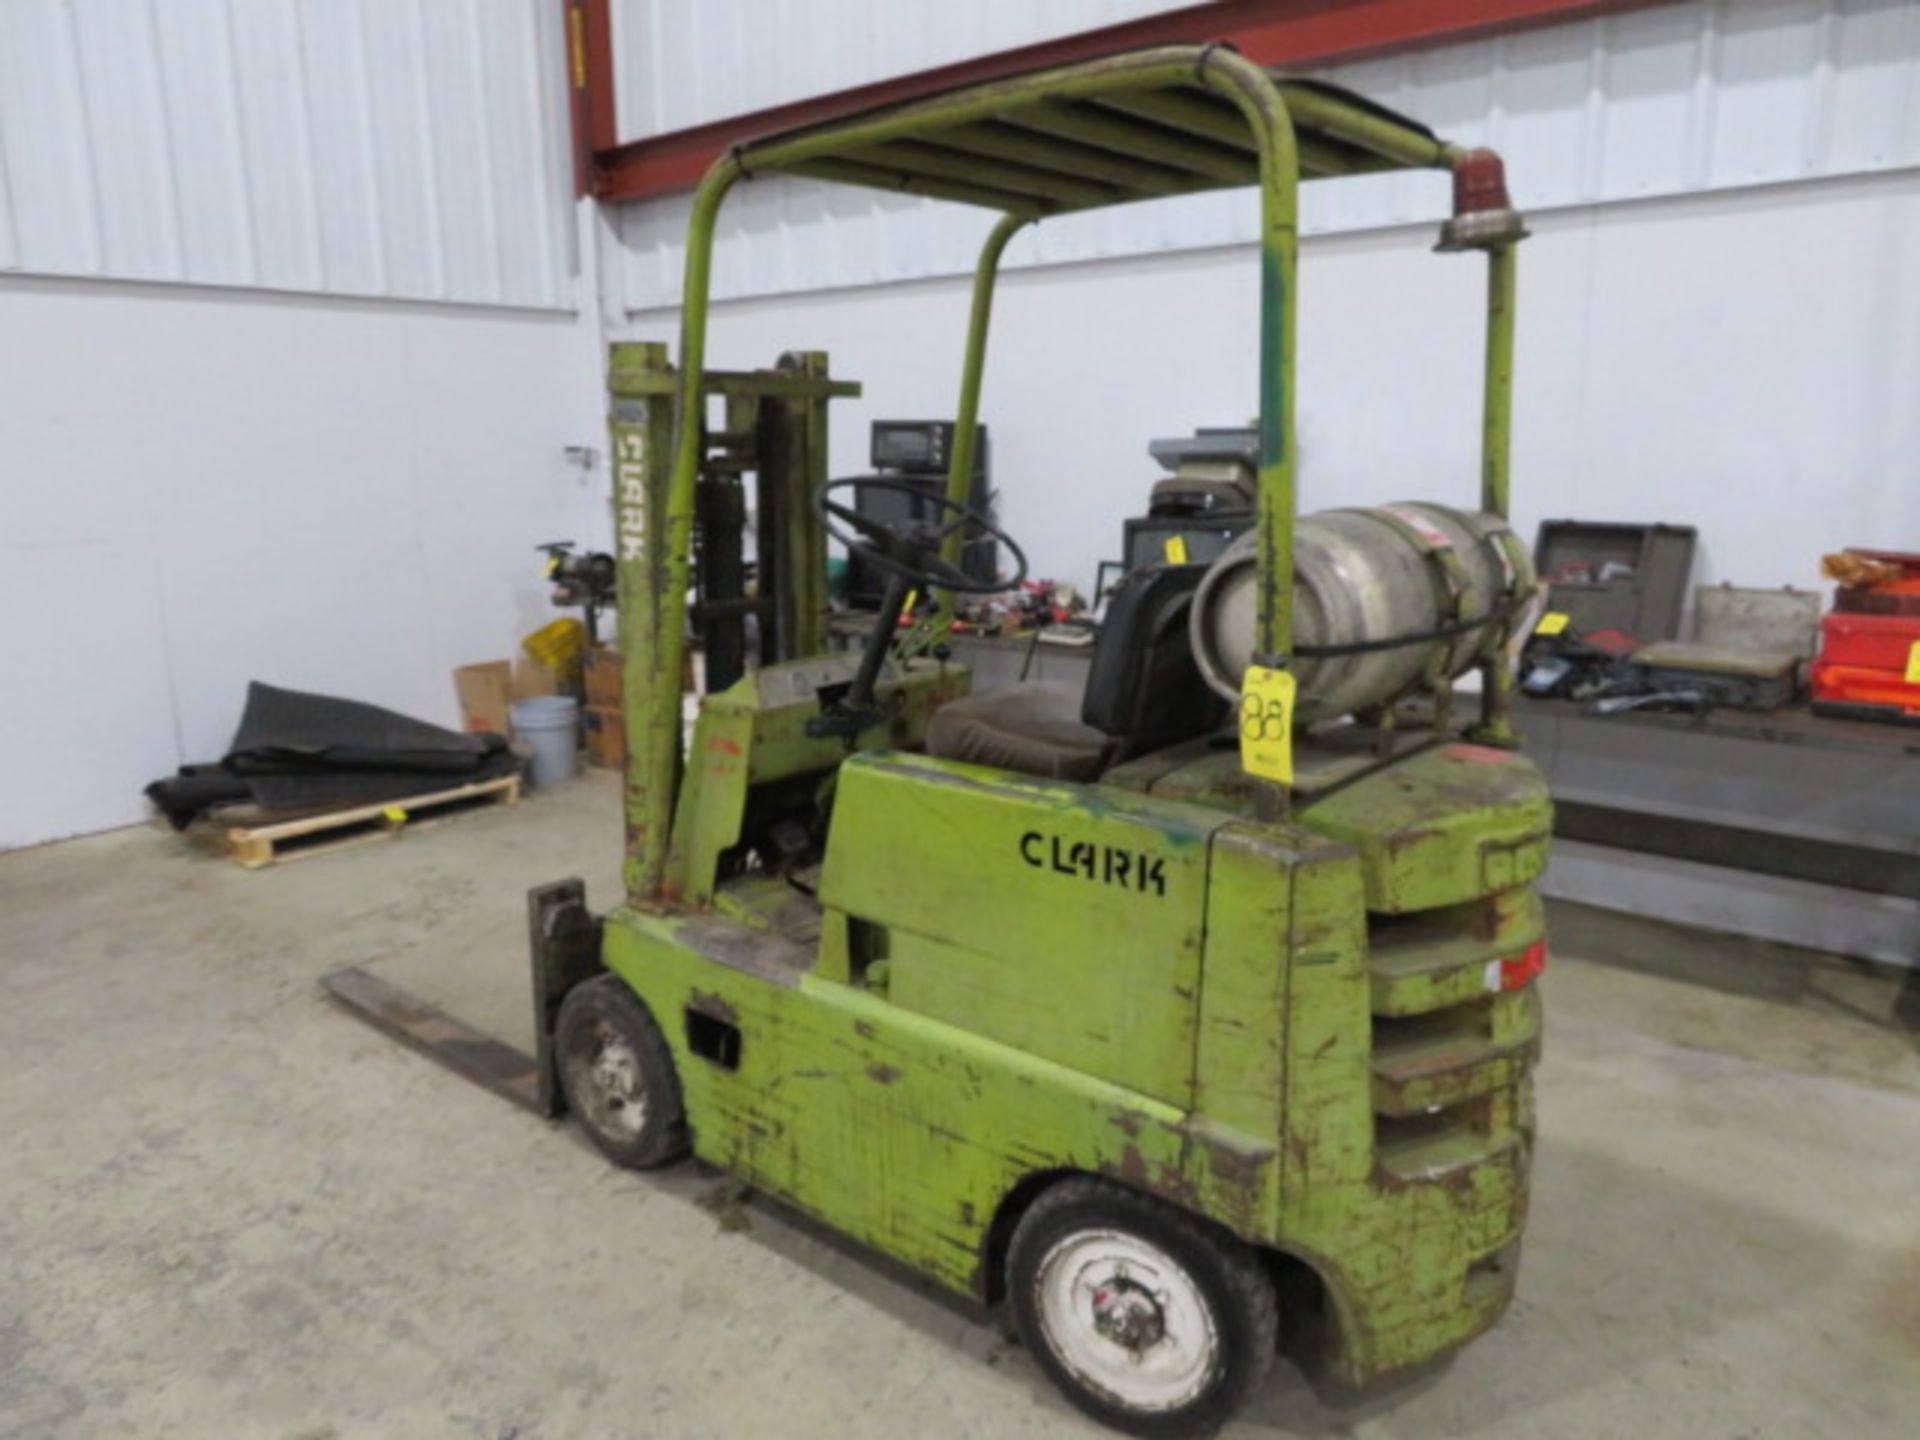 CLARK LP CUSHION TIRE FORK LIFT, EST. 4000 CAP., 2-STAGE MAST, TANK NOT INCLUDED (LOCATED IN - Image 4 of 4